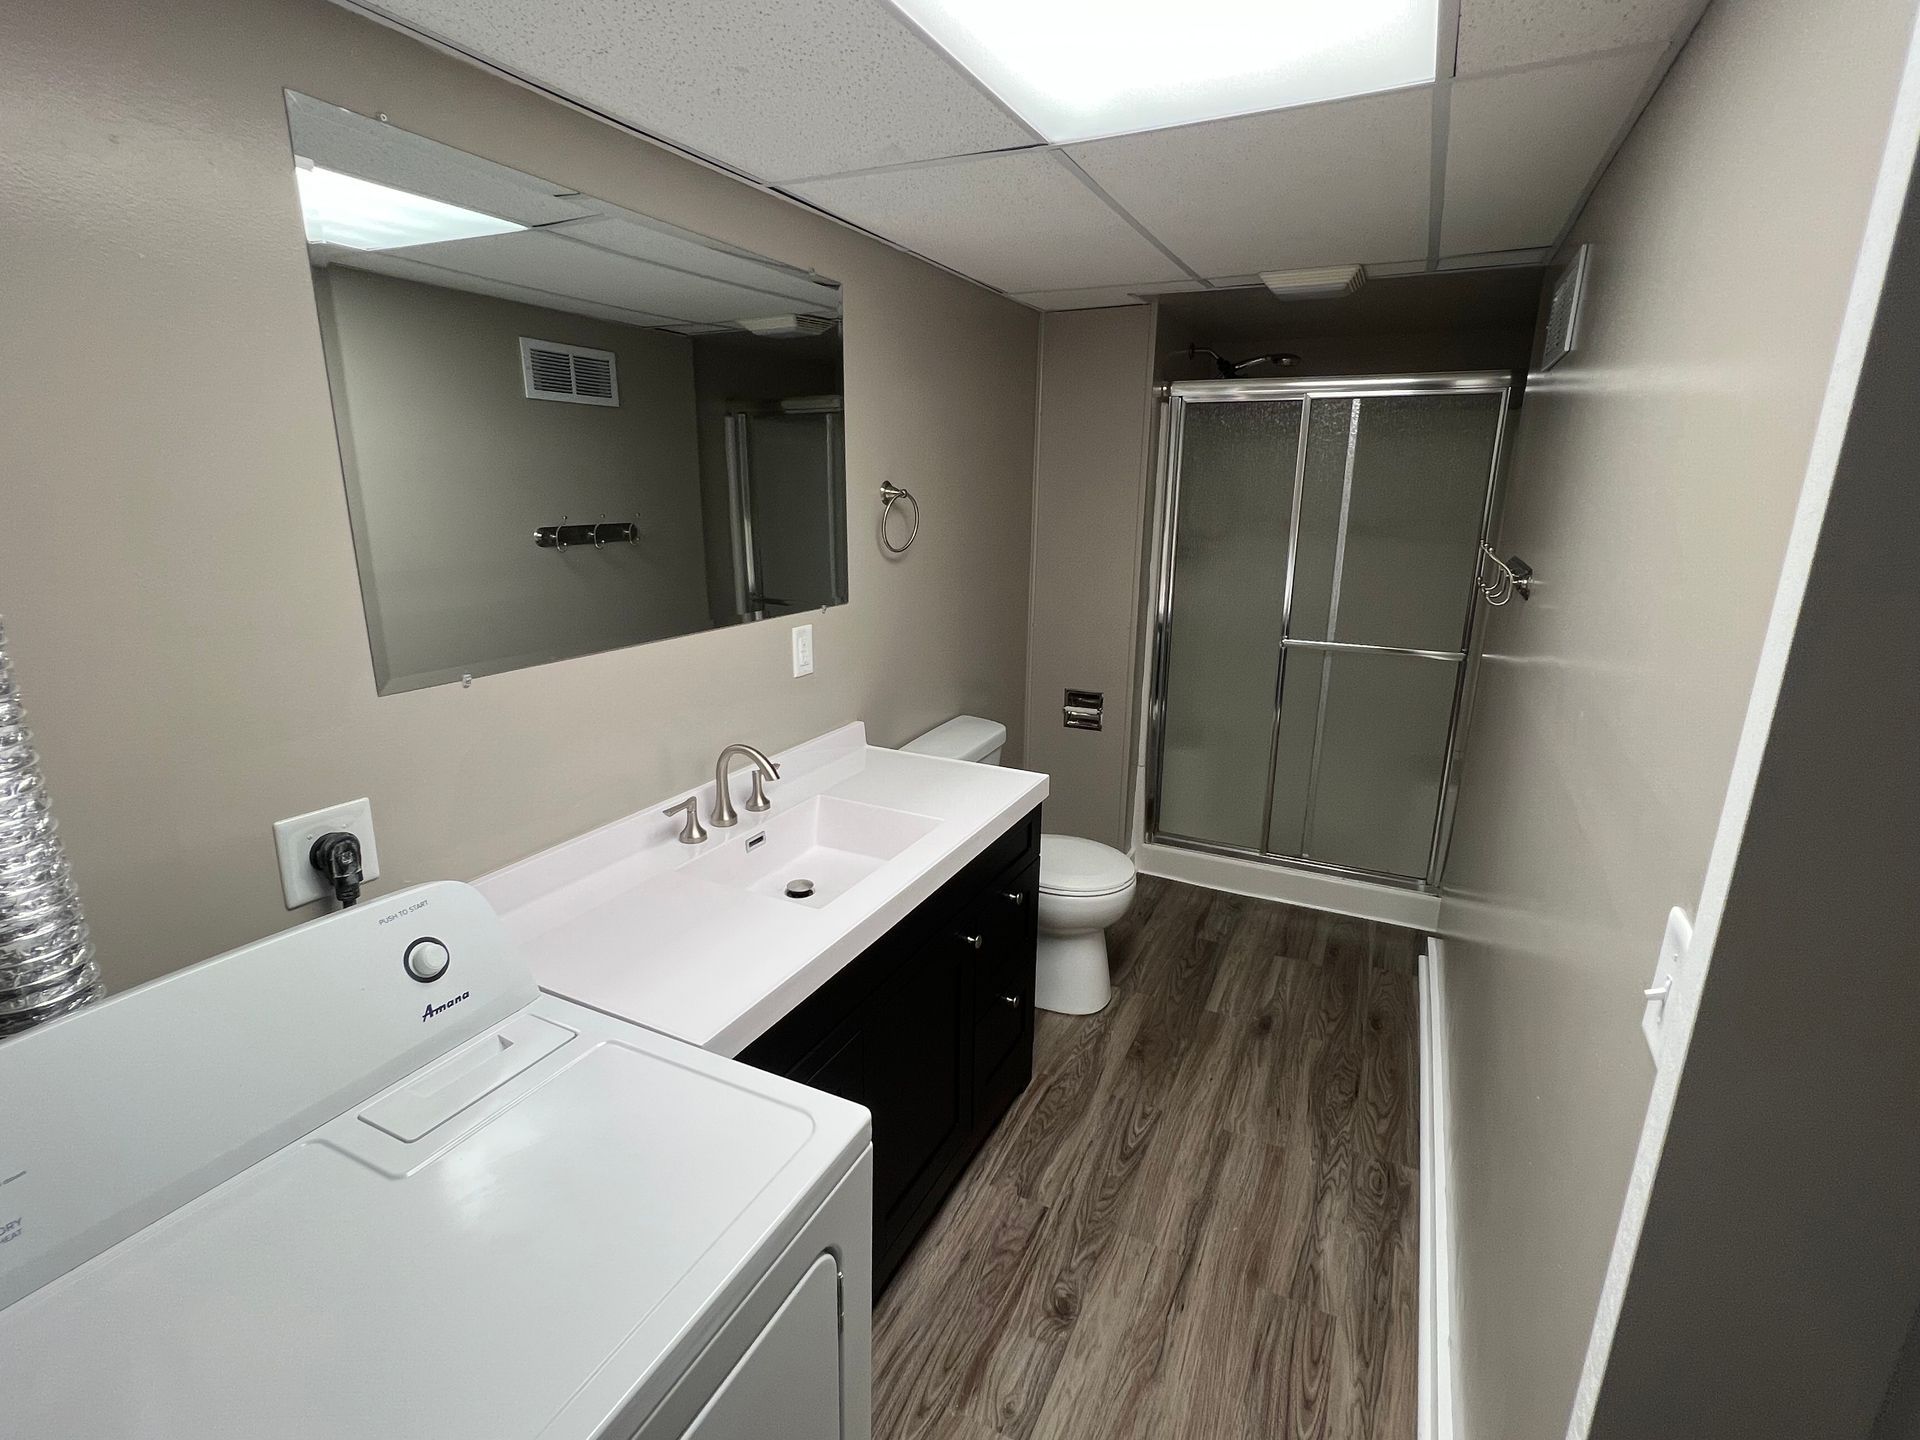 A bathroom with a washer and dryer , sink , toilet and shower.